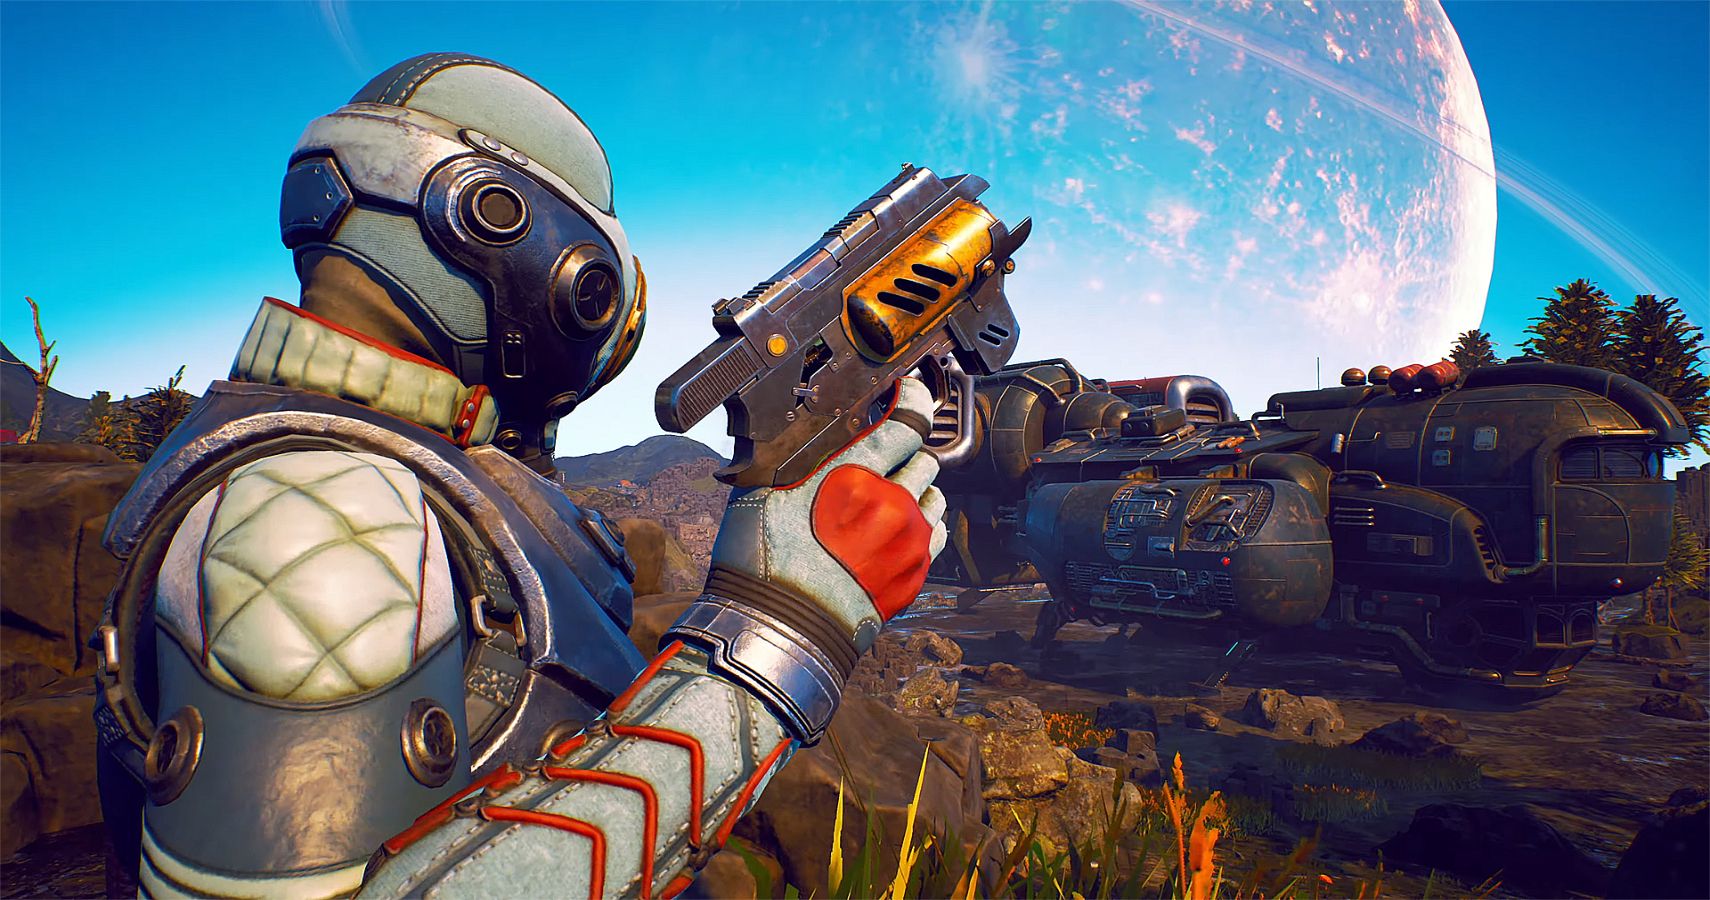 outer worlds ps4 black friday